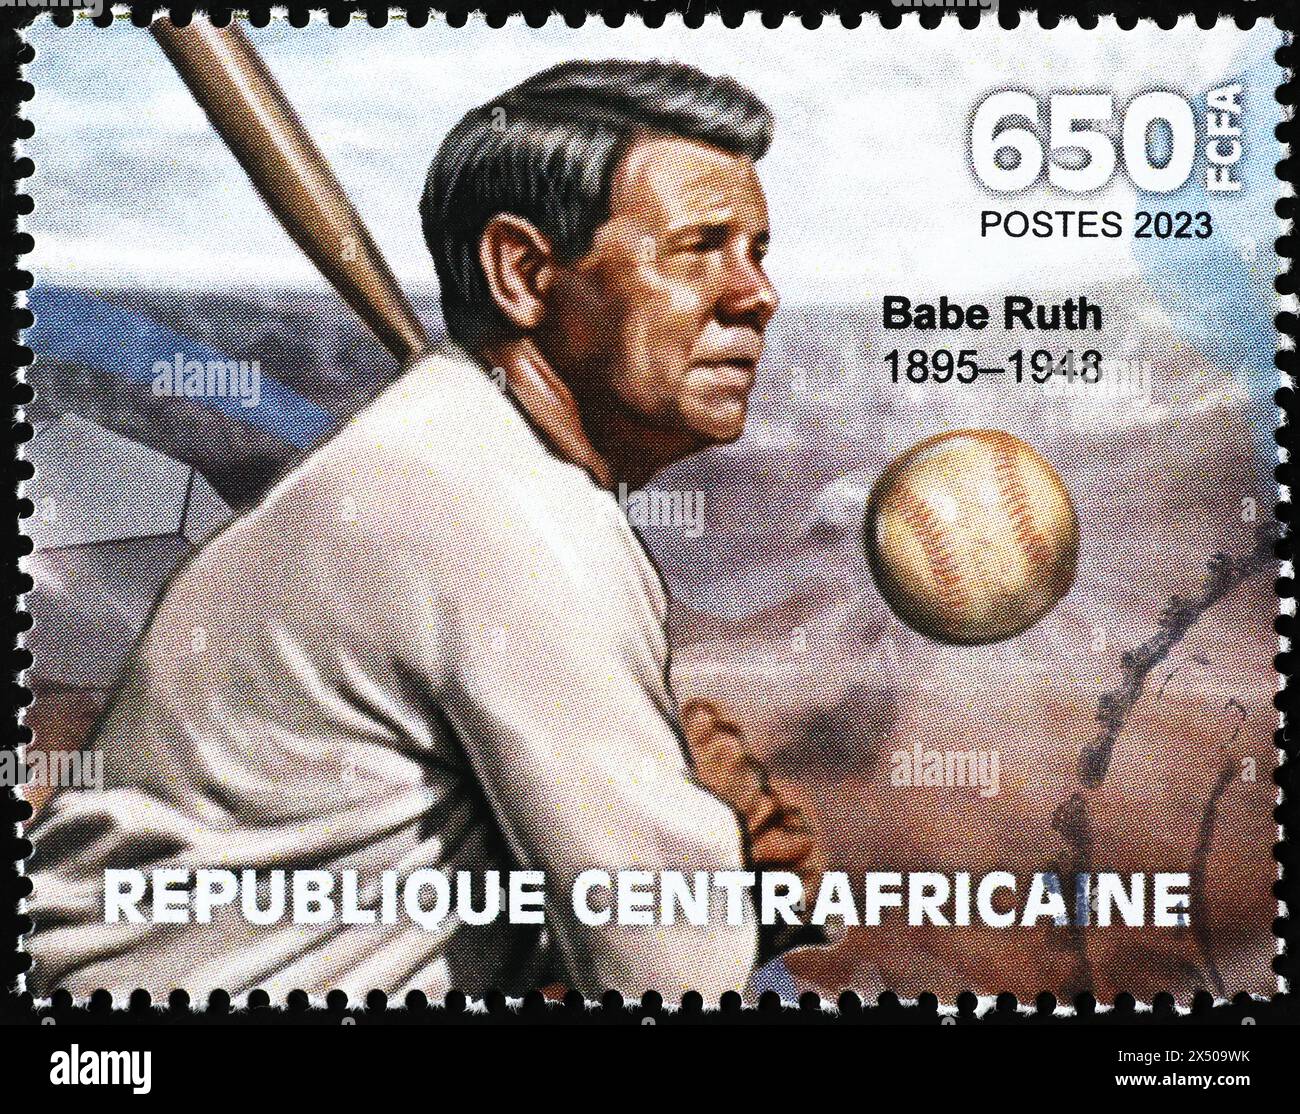 Babe Ruth and baseball on african stamp Stock Photo